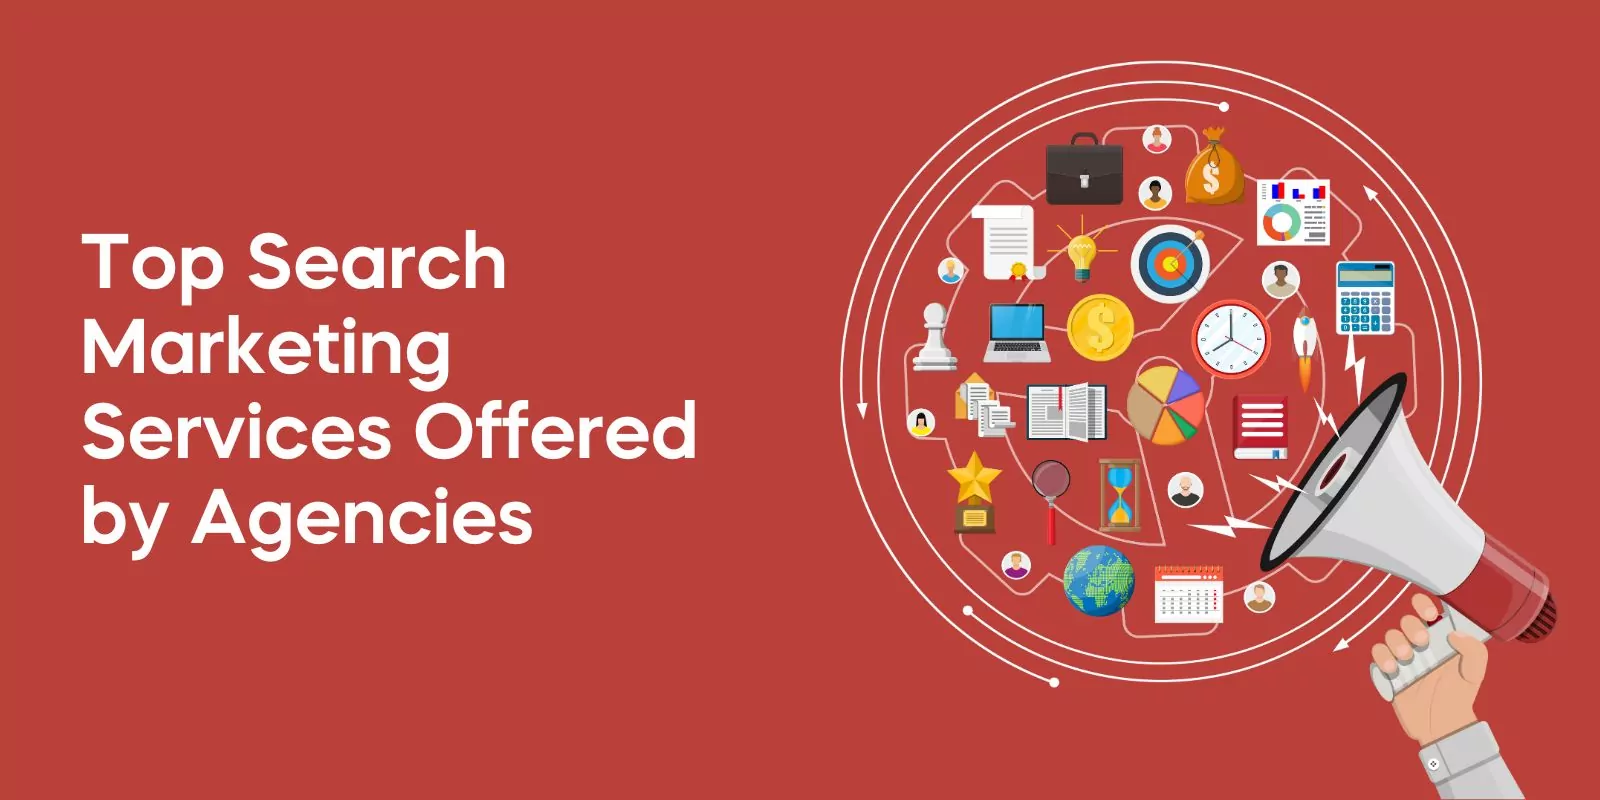 Top Search Marketing Services Offered by Agencies